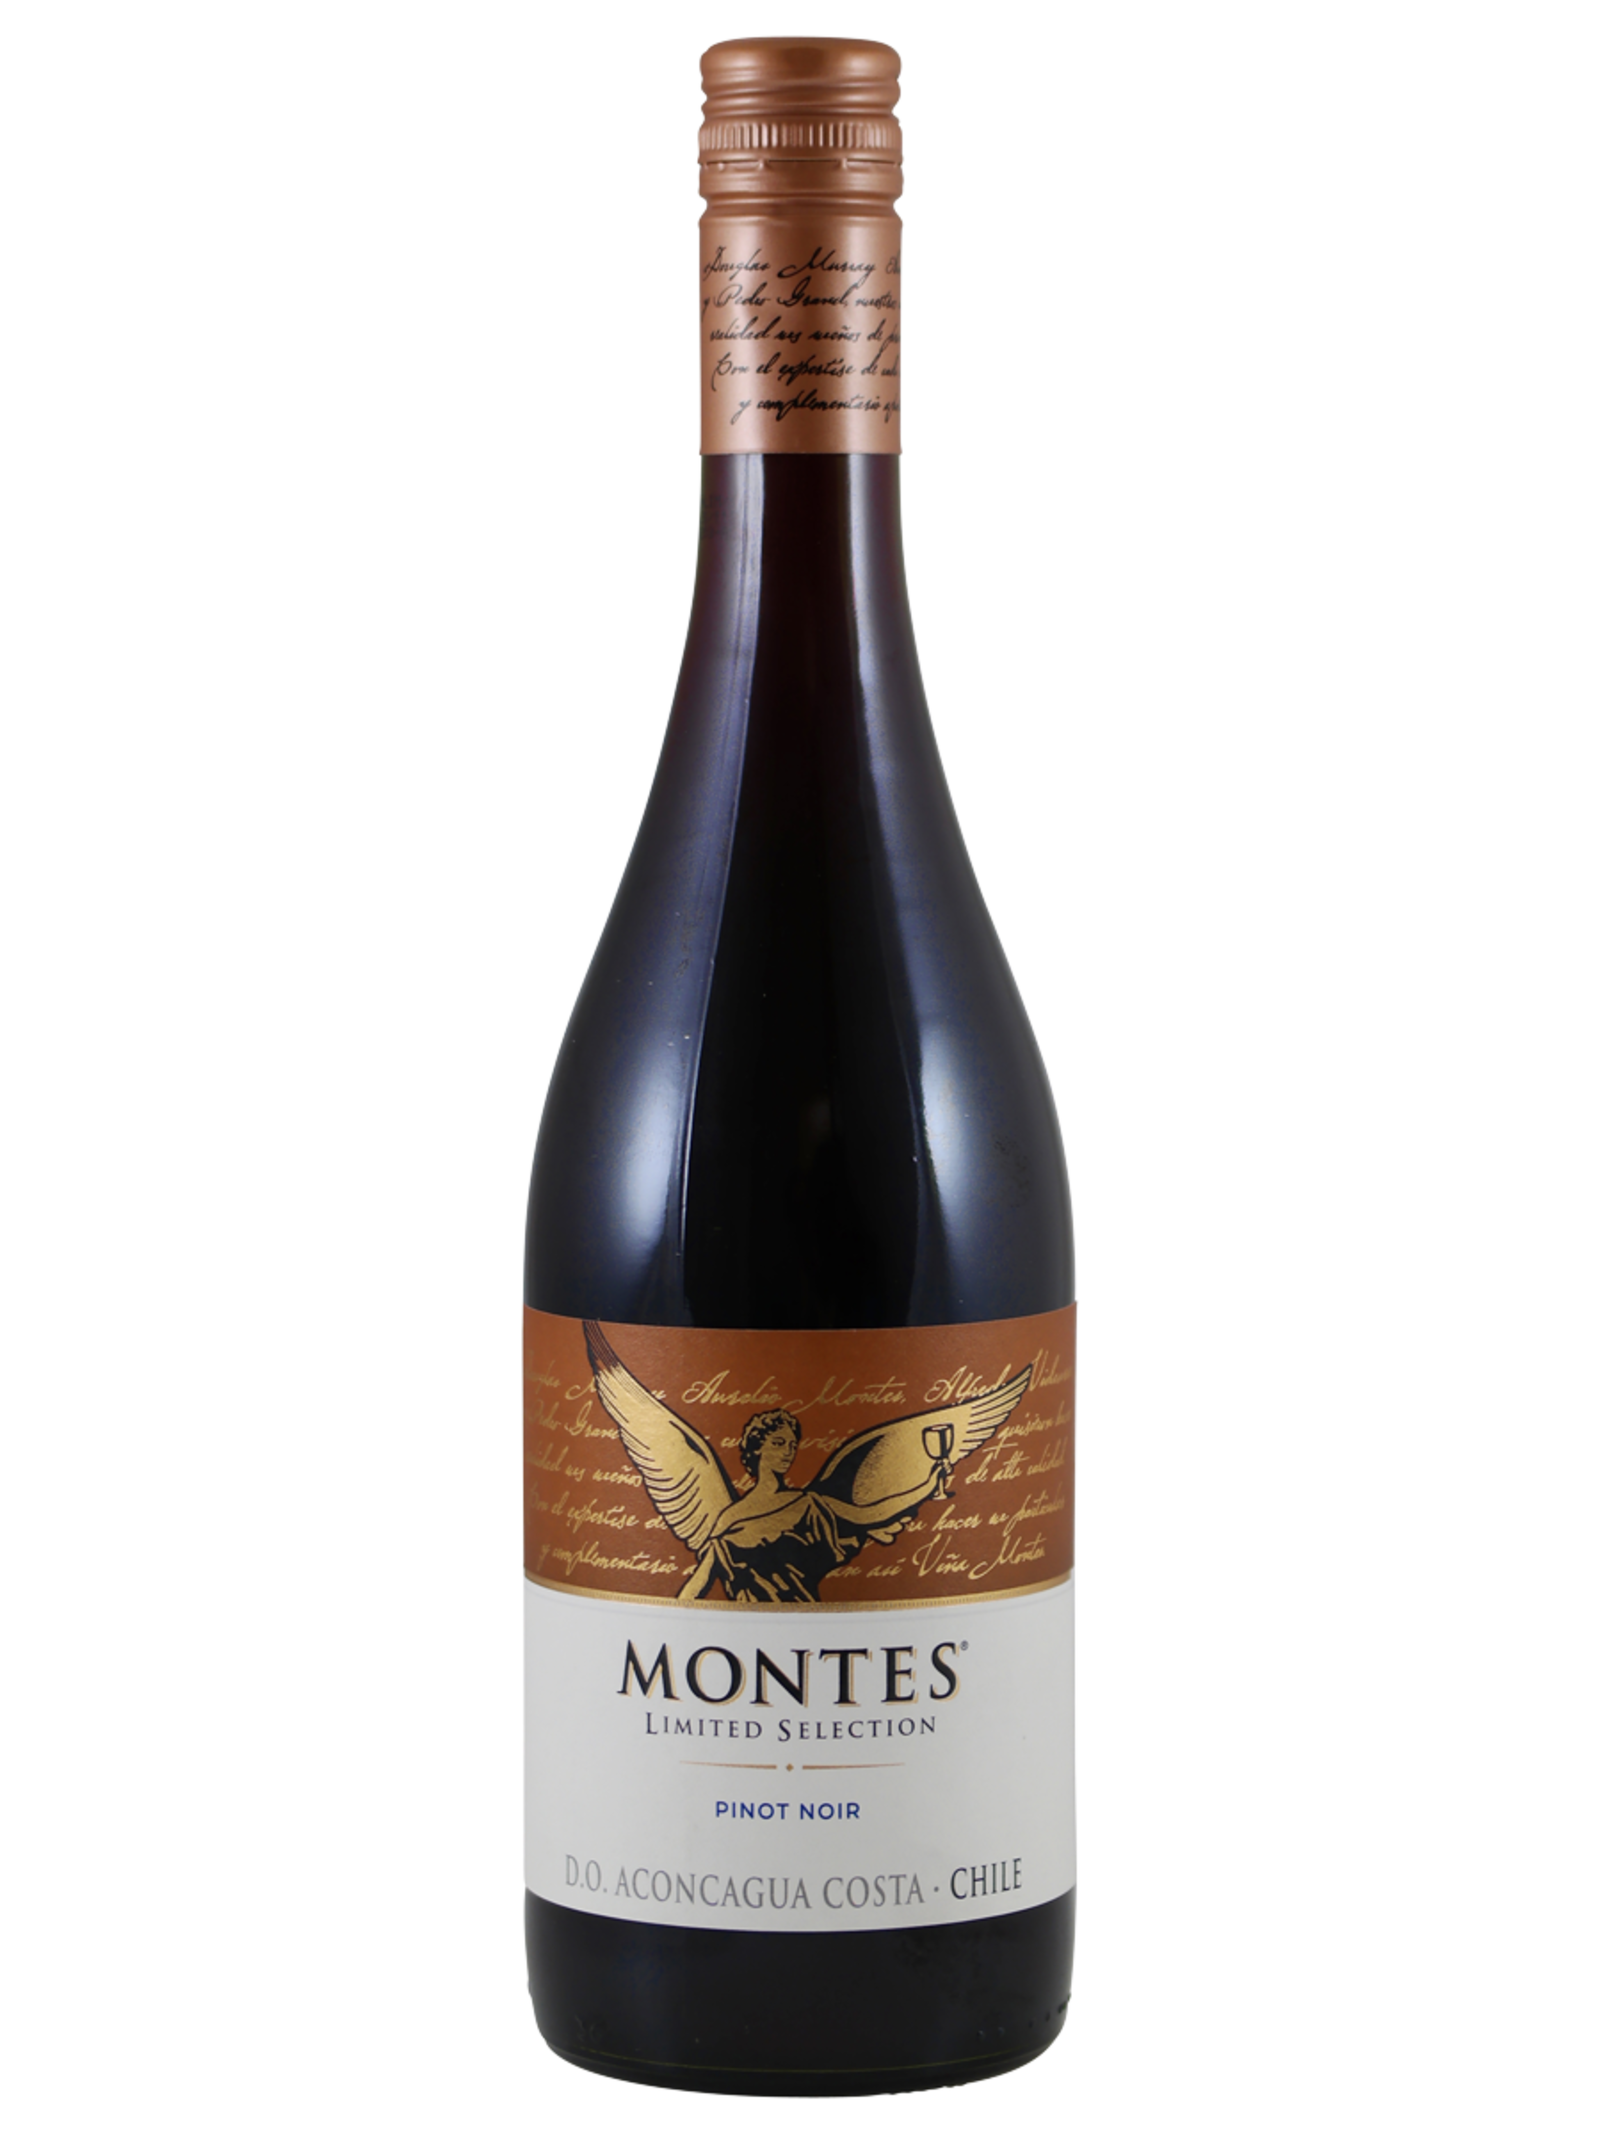 Montes Montes Limited Selection Pinot Noir